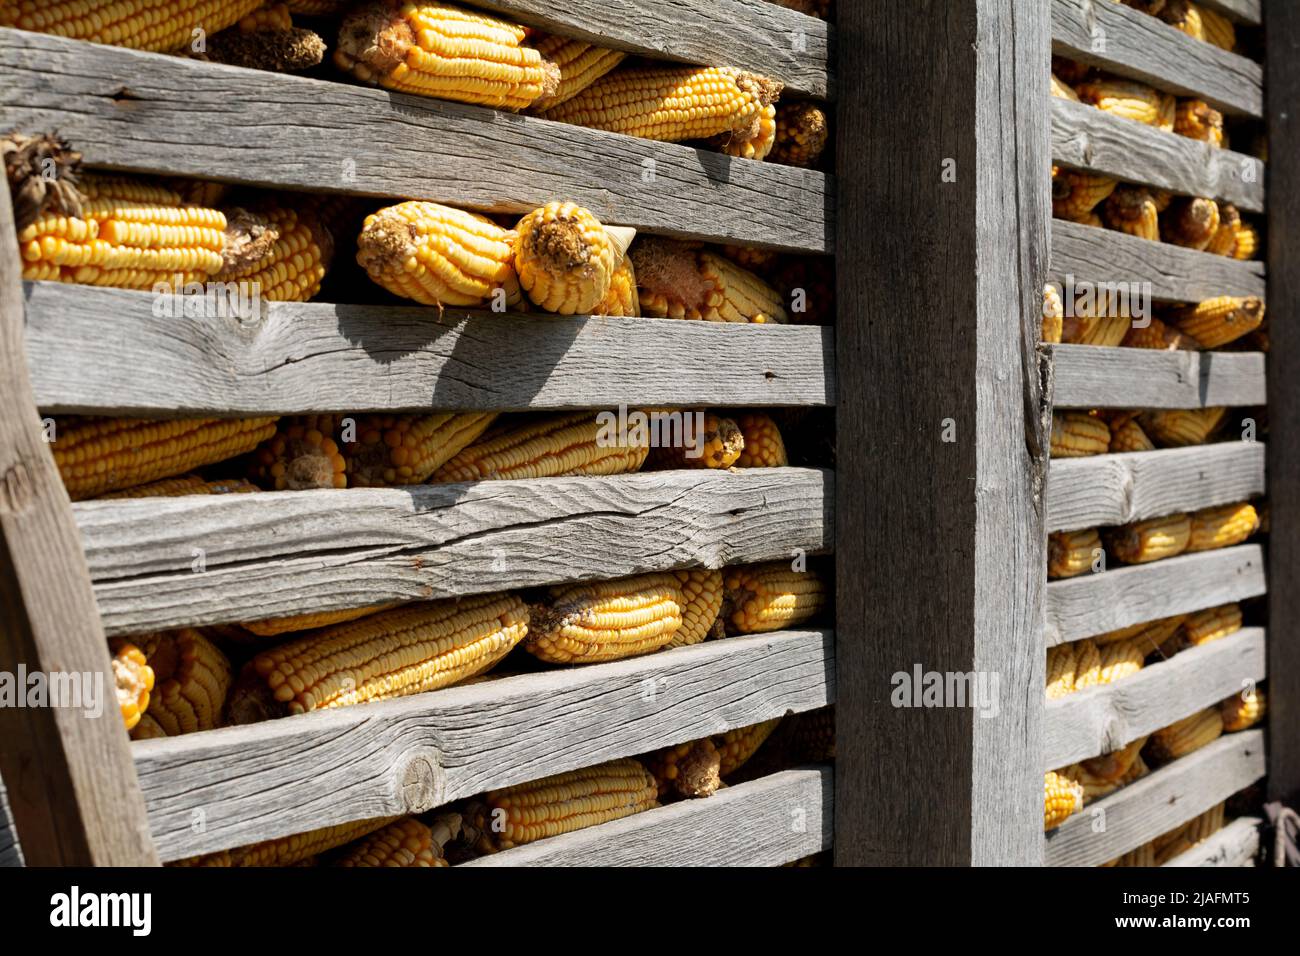 Harvest is over. An old corncrib or hambar, made of timber beams and laths, is loaded with ripe ears of corn. Stock Photo